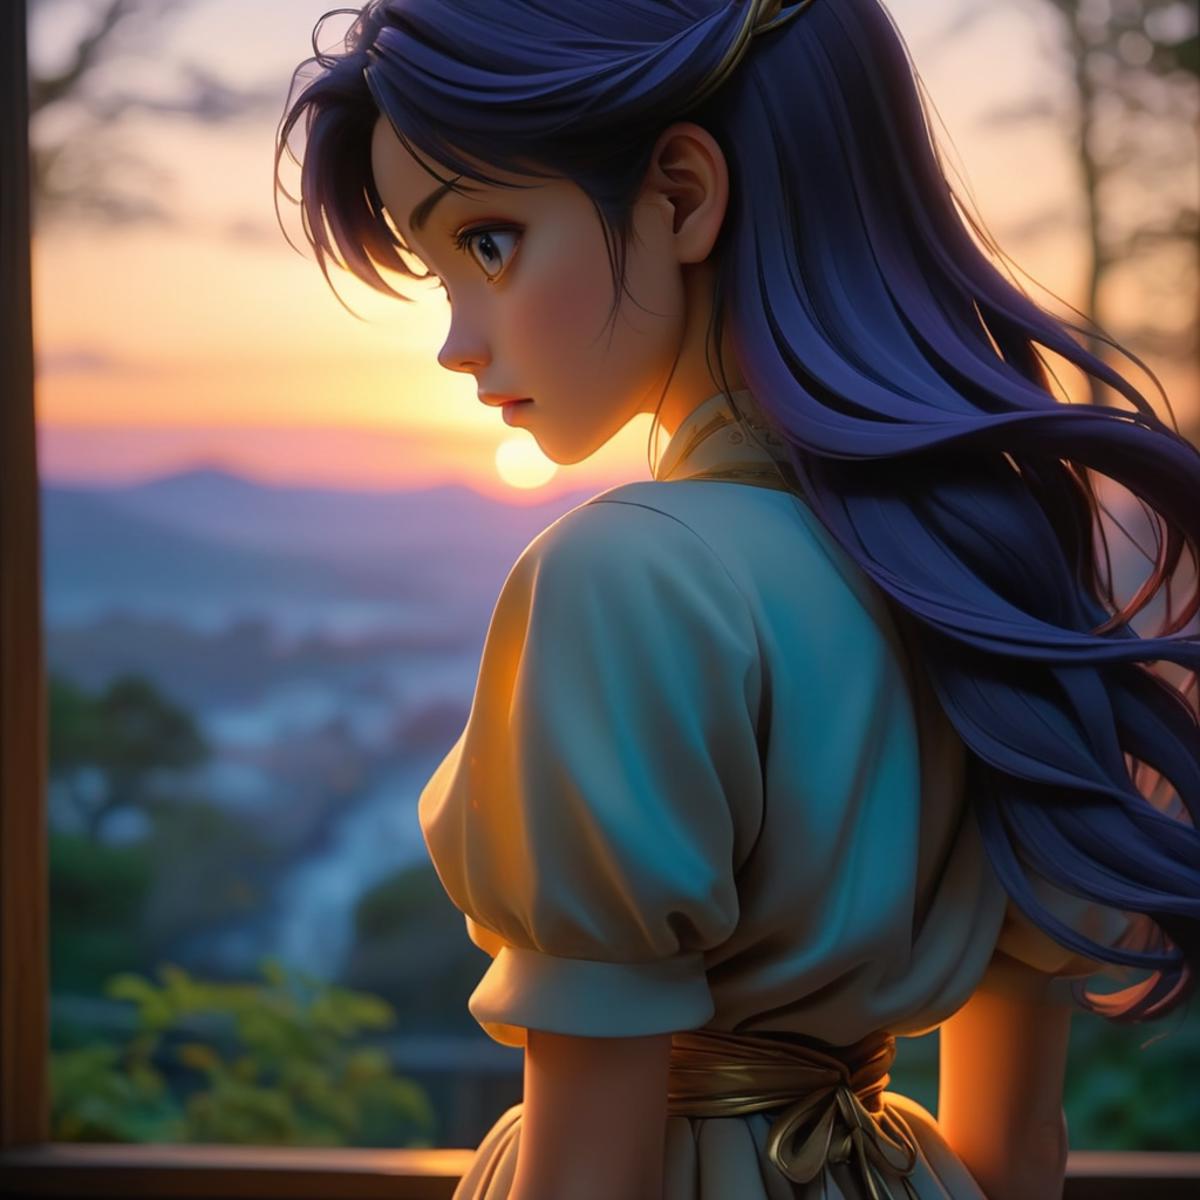 A beautifully rendered anime girl with blue hair and a sunset in the background.